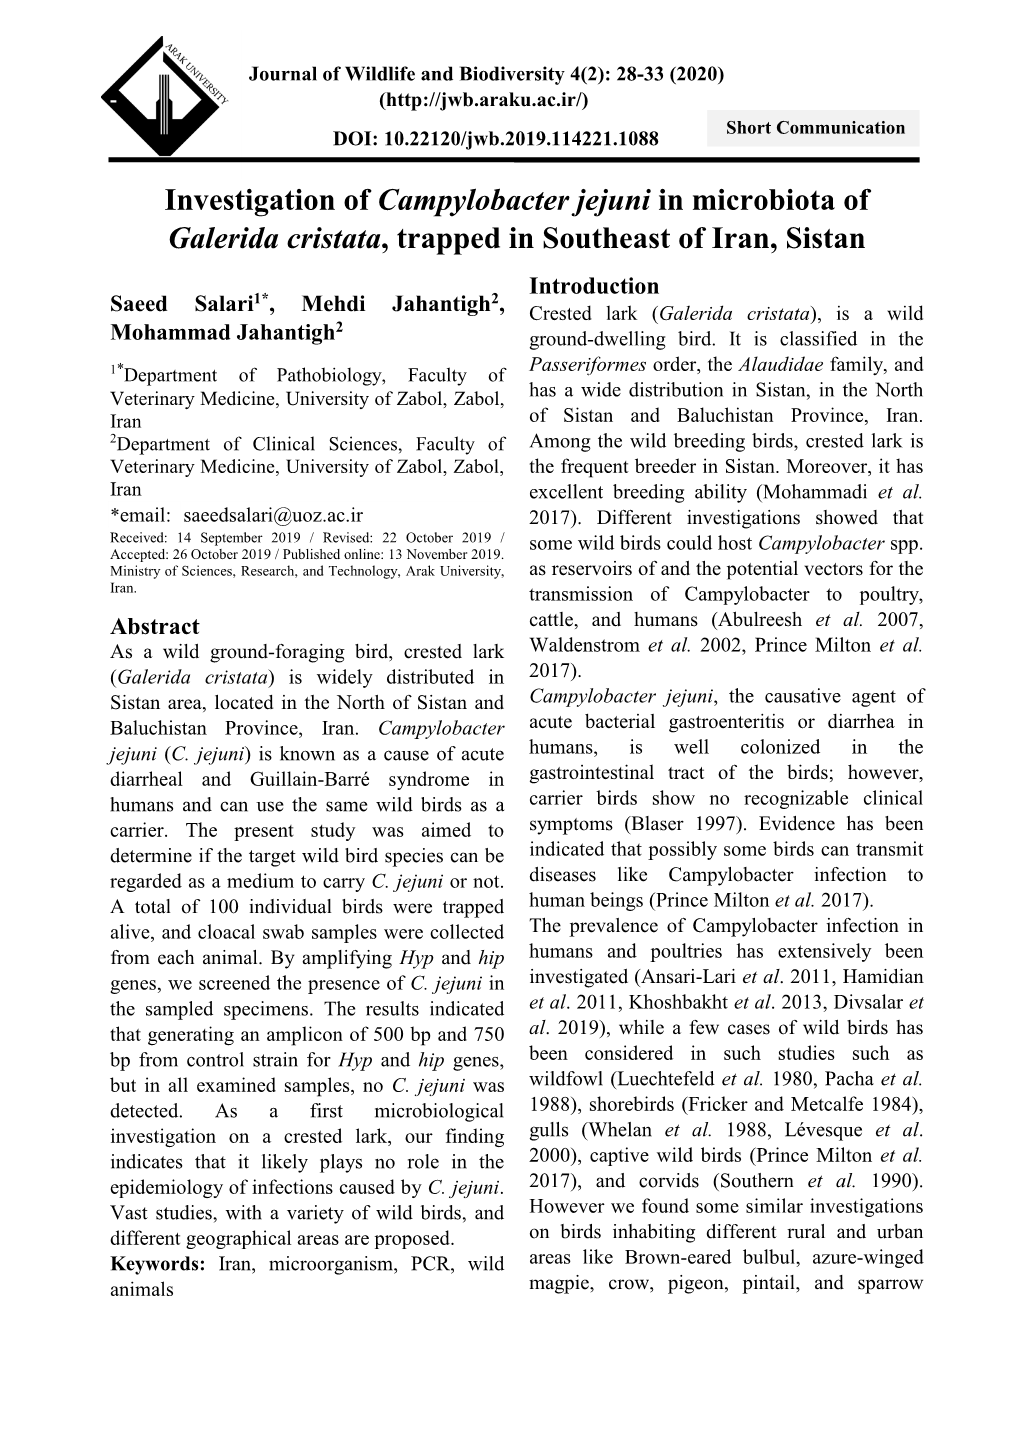 Investigation of Campylobacter Jejuni in Microbiota of Galerida Cristata, Trapped in Southeast of Iran, Sistan